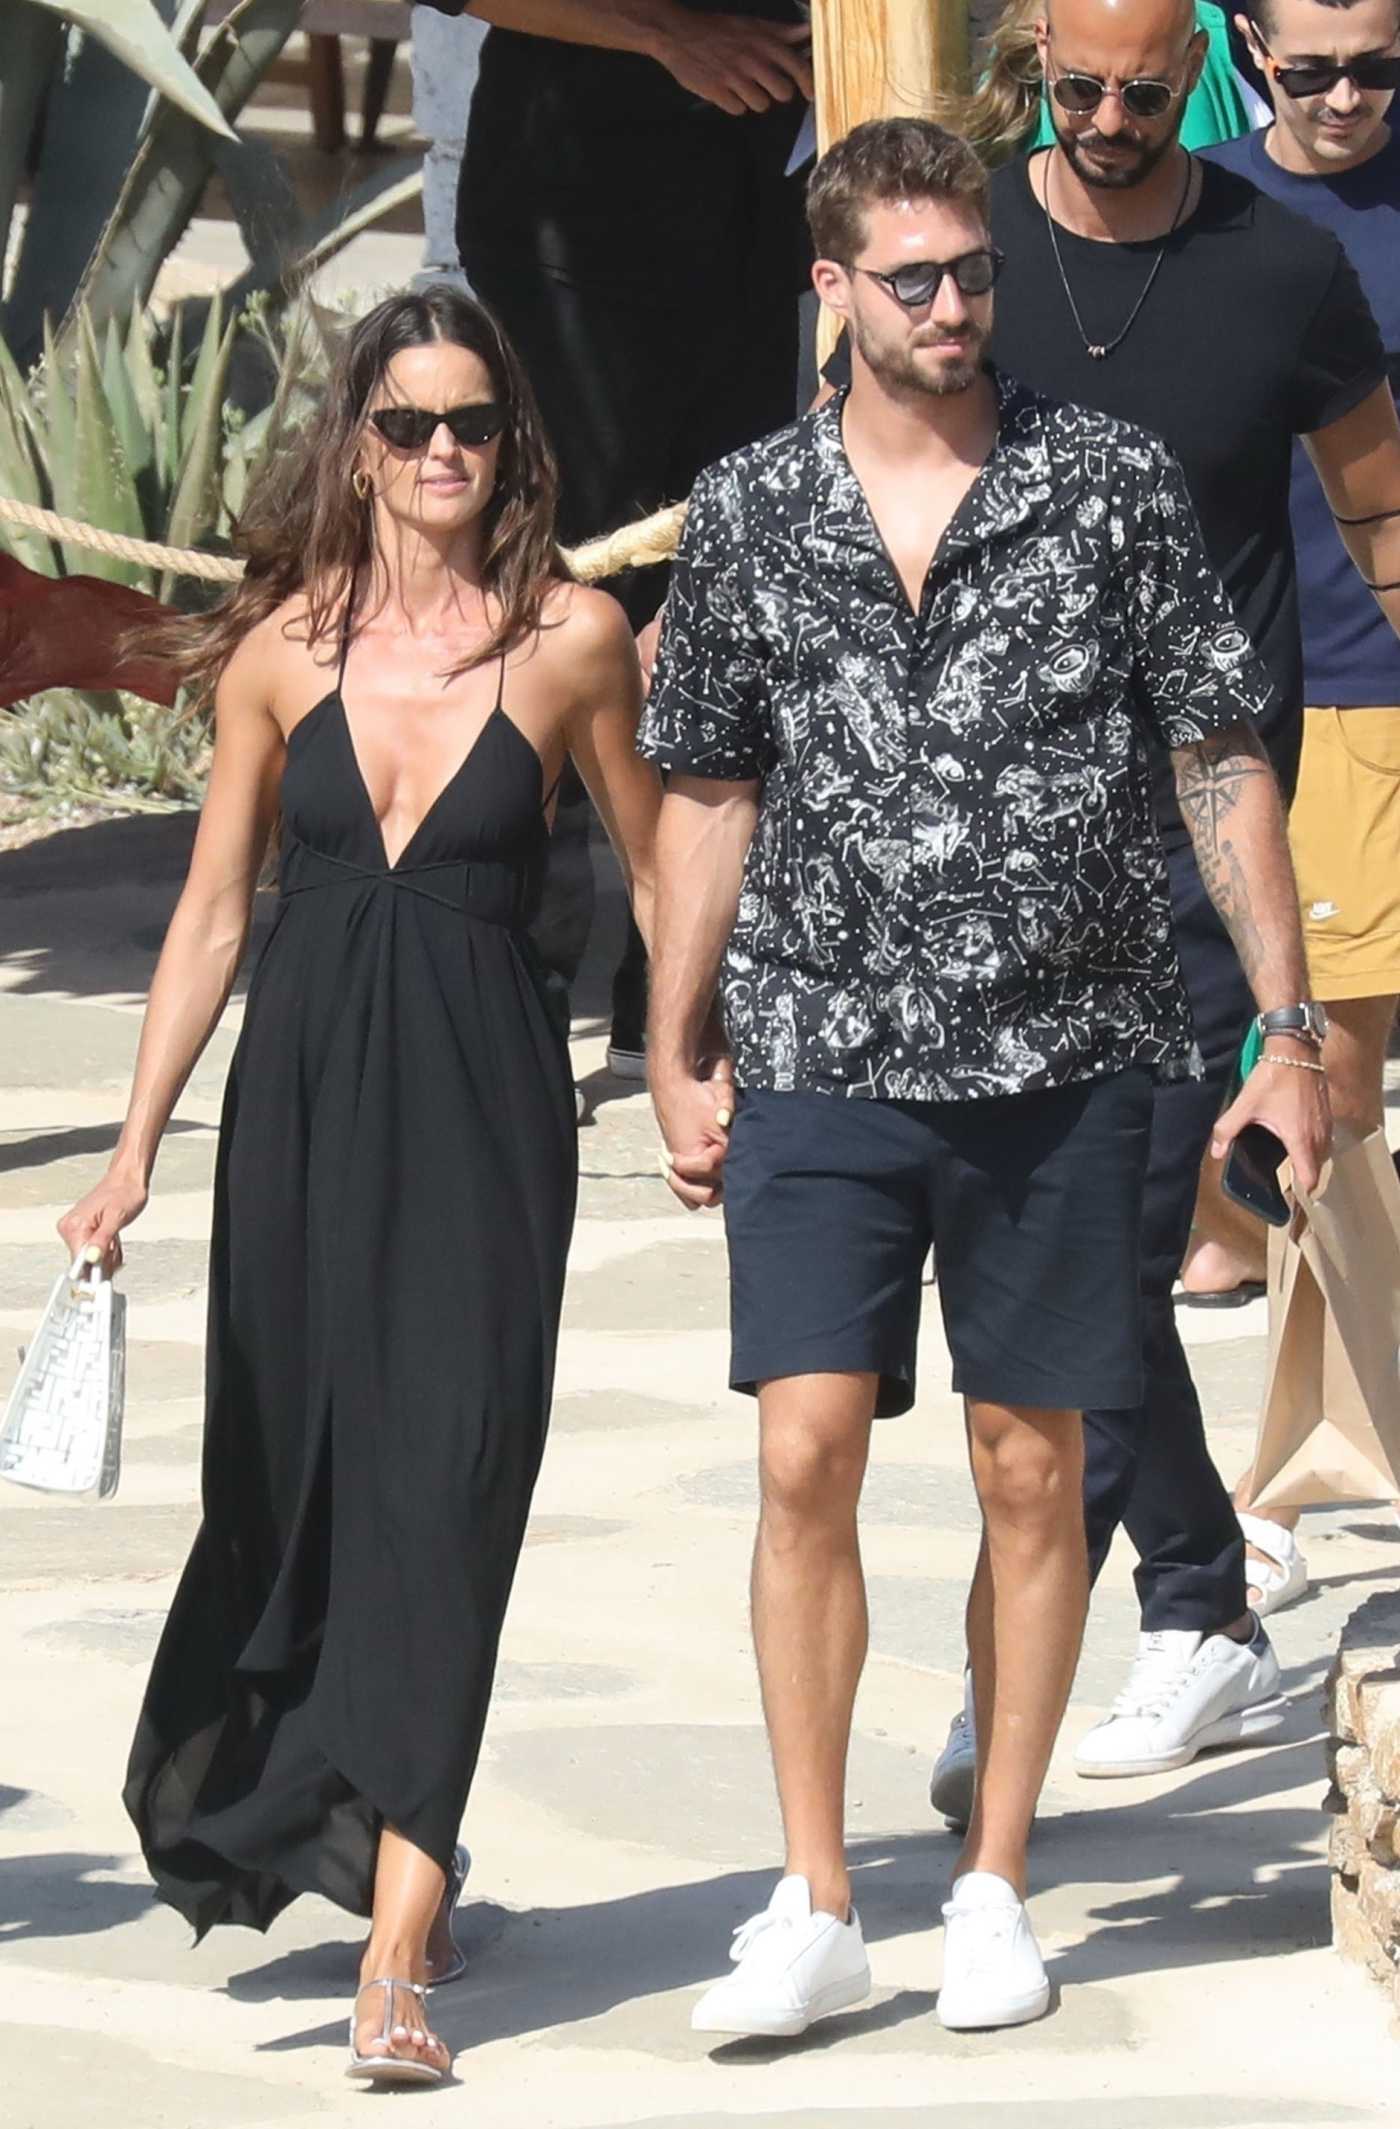 Izabel Goulart in a Black Dress Was Seen Out with Her Fiance Kevin Trapp on the Greek Island of Mykonos 07/16/2021